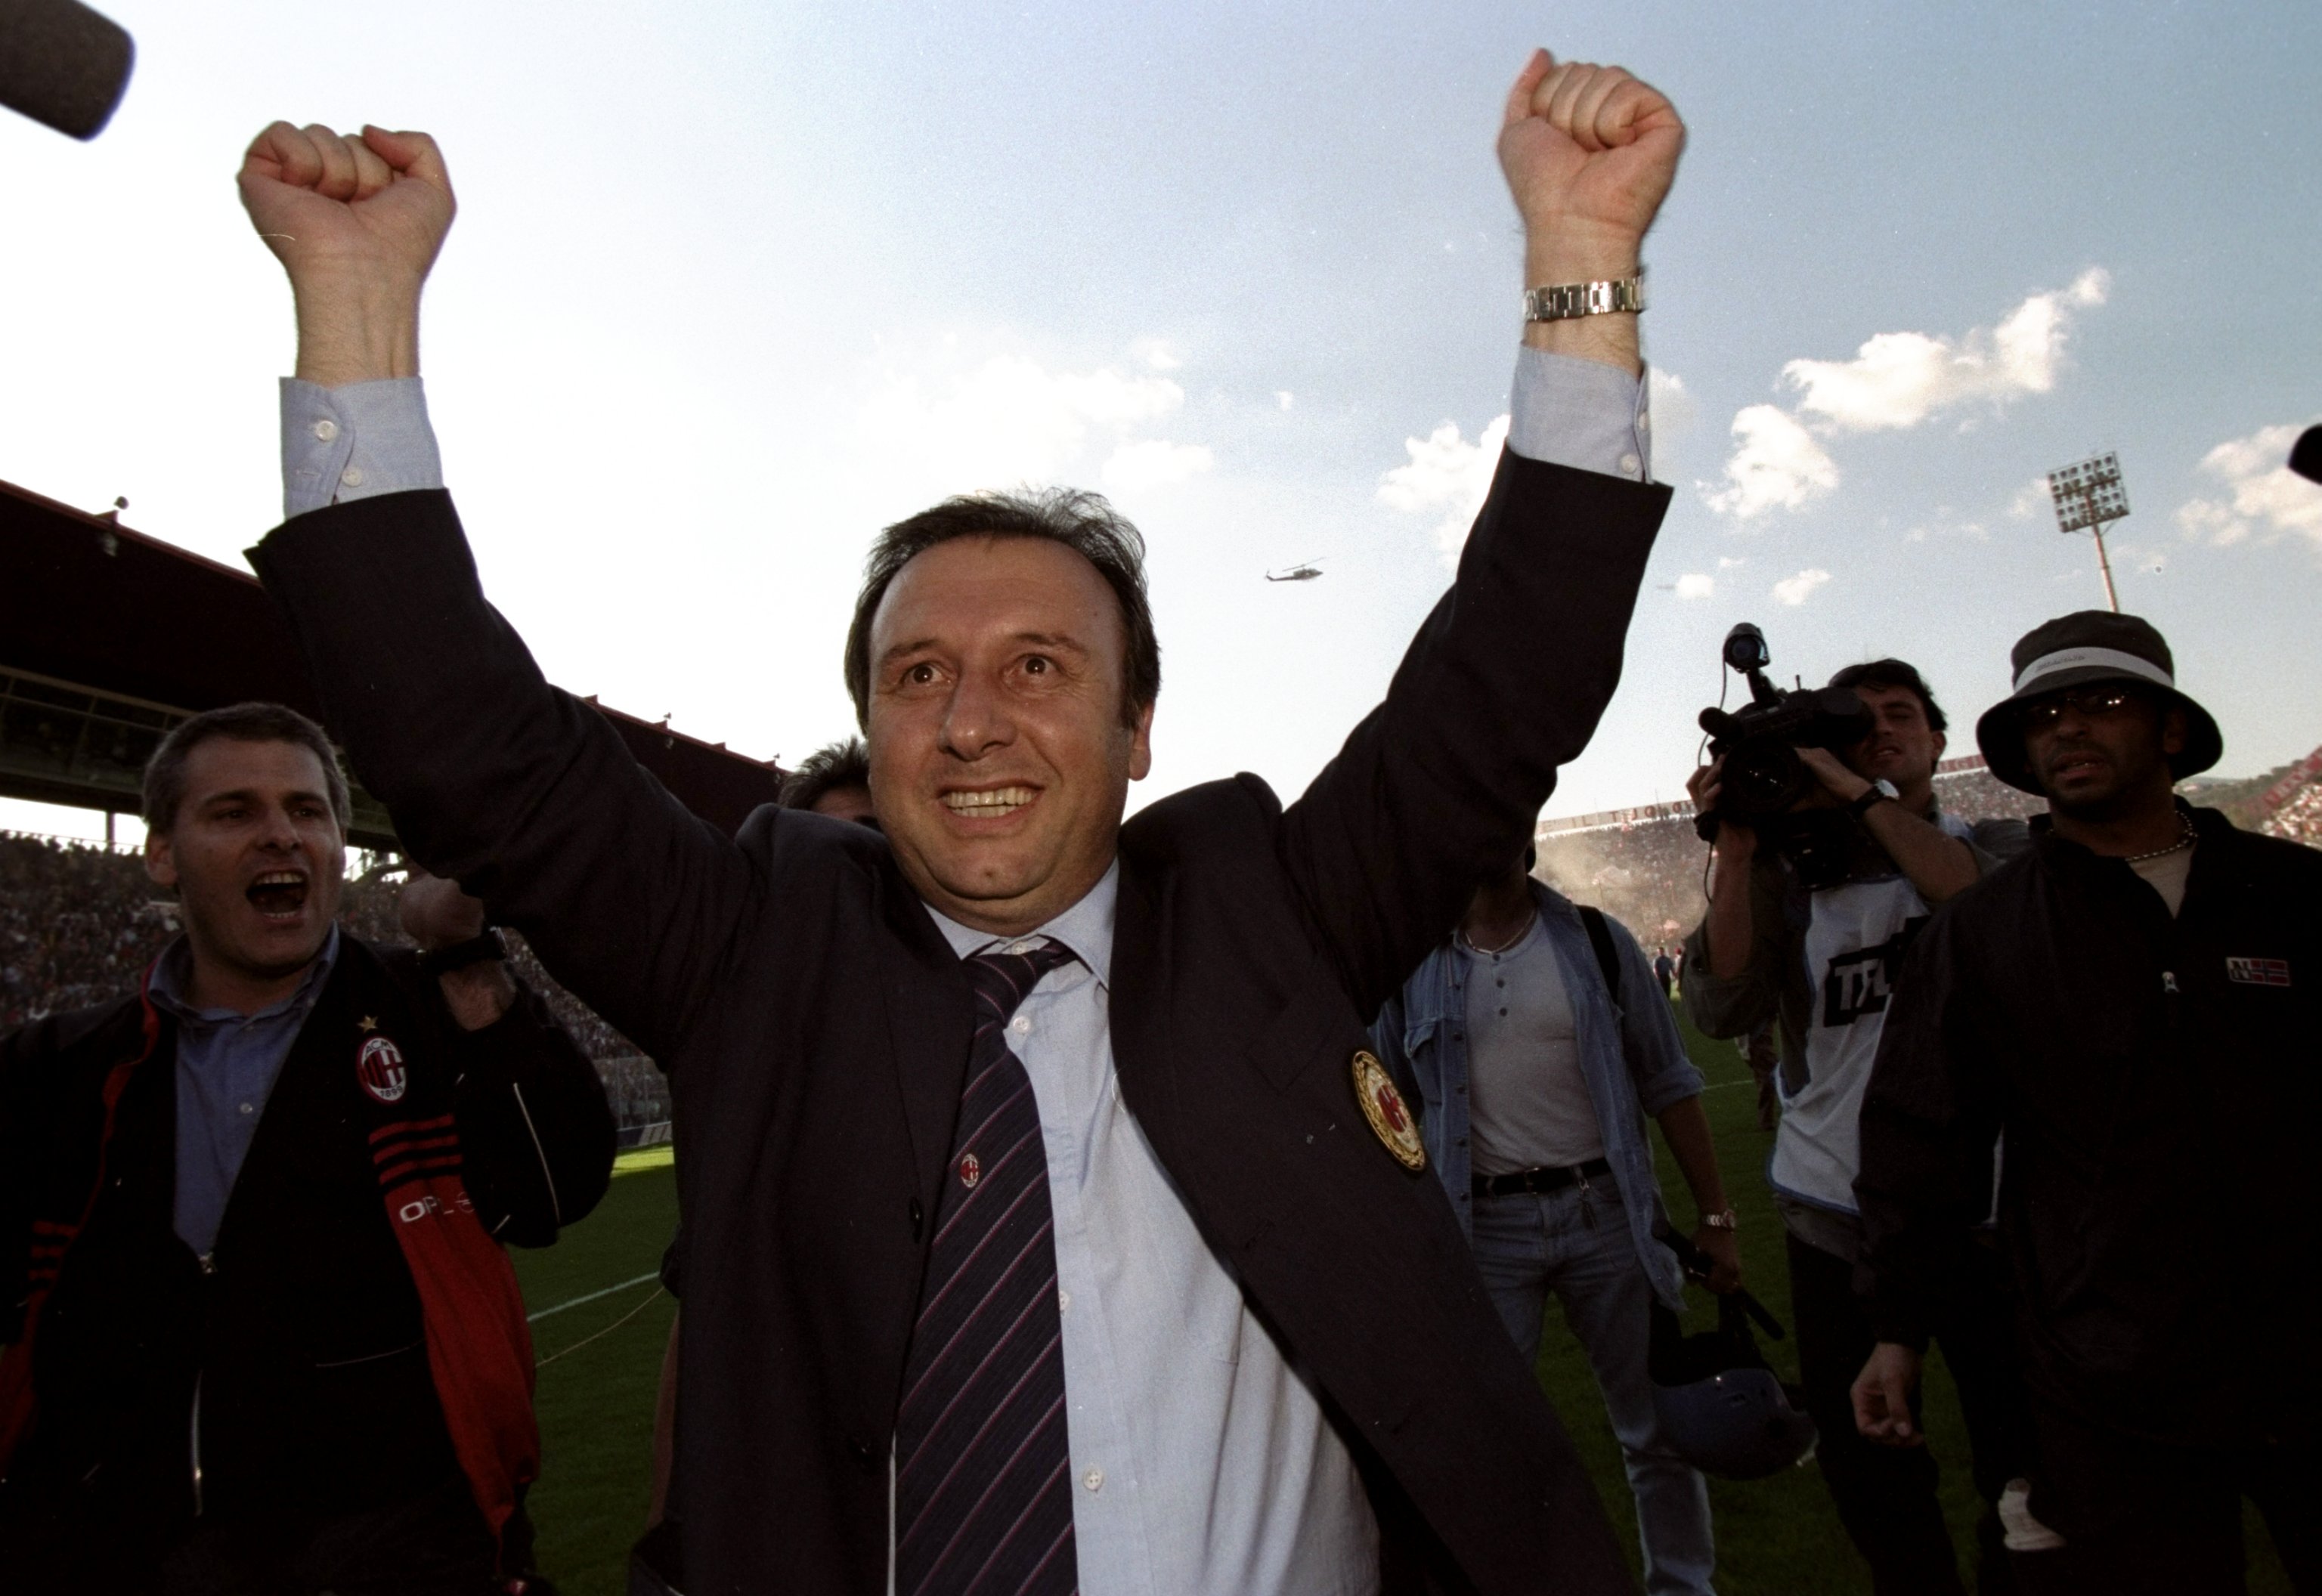 23 May 1999:  Alberto Zaccheroni the AC Milan coach celebrates victory after the Serie A match against Perugia at the Stadio Renato Curi in Perugia, Italy.  The match finished in a 1-2 victory for AC Milan and they clinched the Championship title. \ Manda